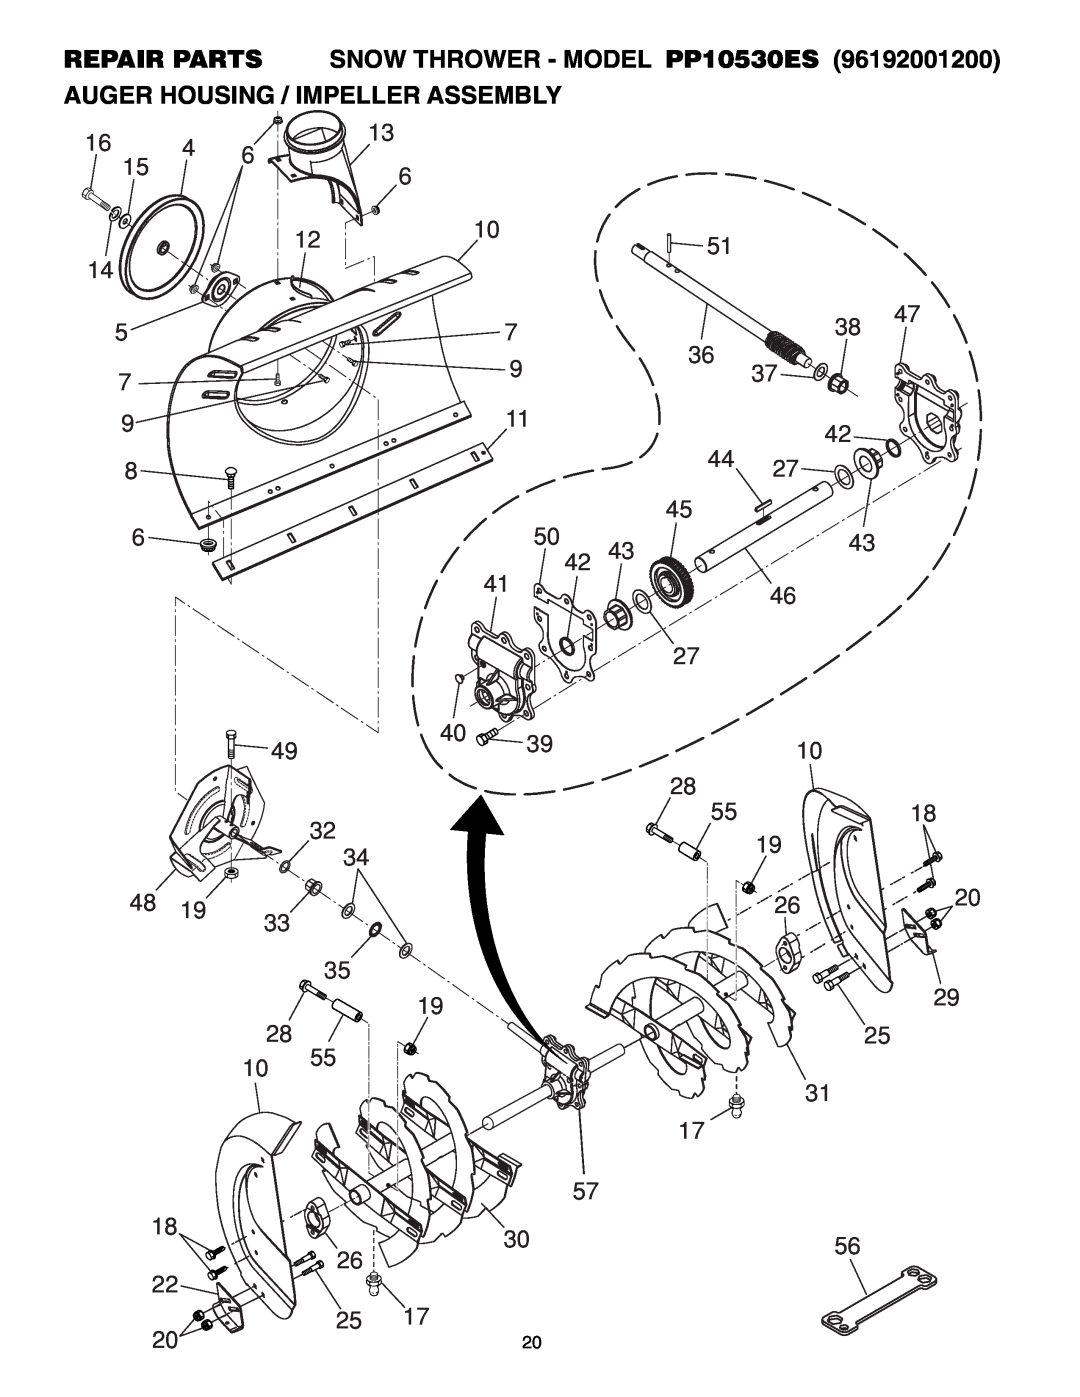 Poulan 96192001200, 407885 owner manual 5518, Auger Housing / Impeller Assembly, REPAIR PARTS SNOW THROWER - MODEL PP10530ES 